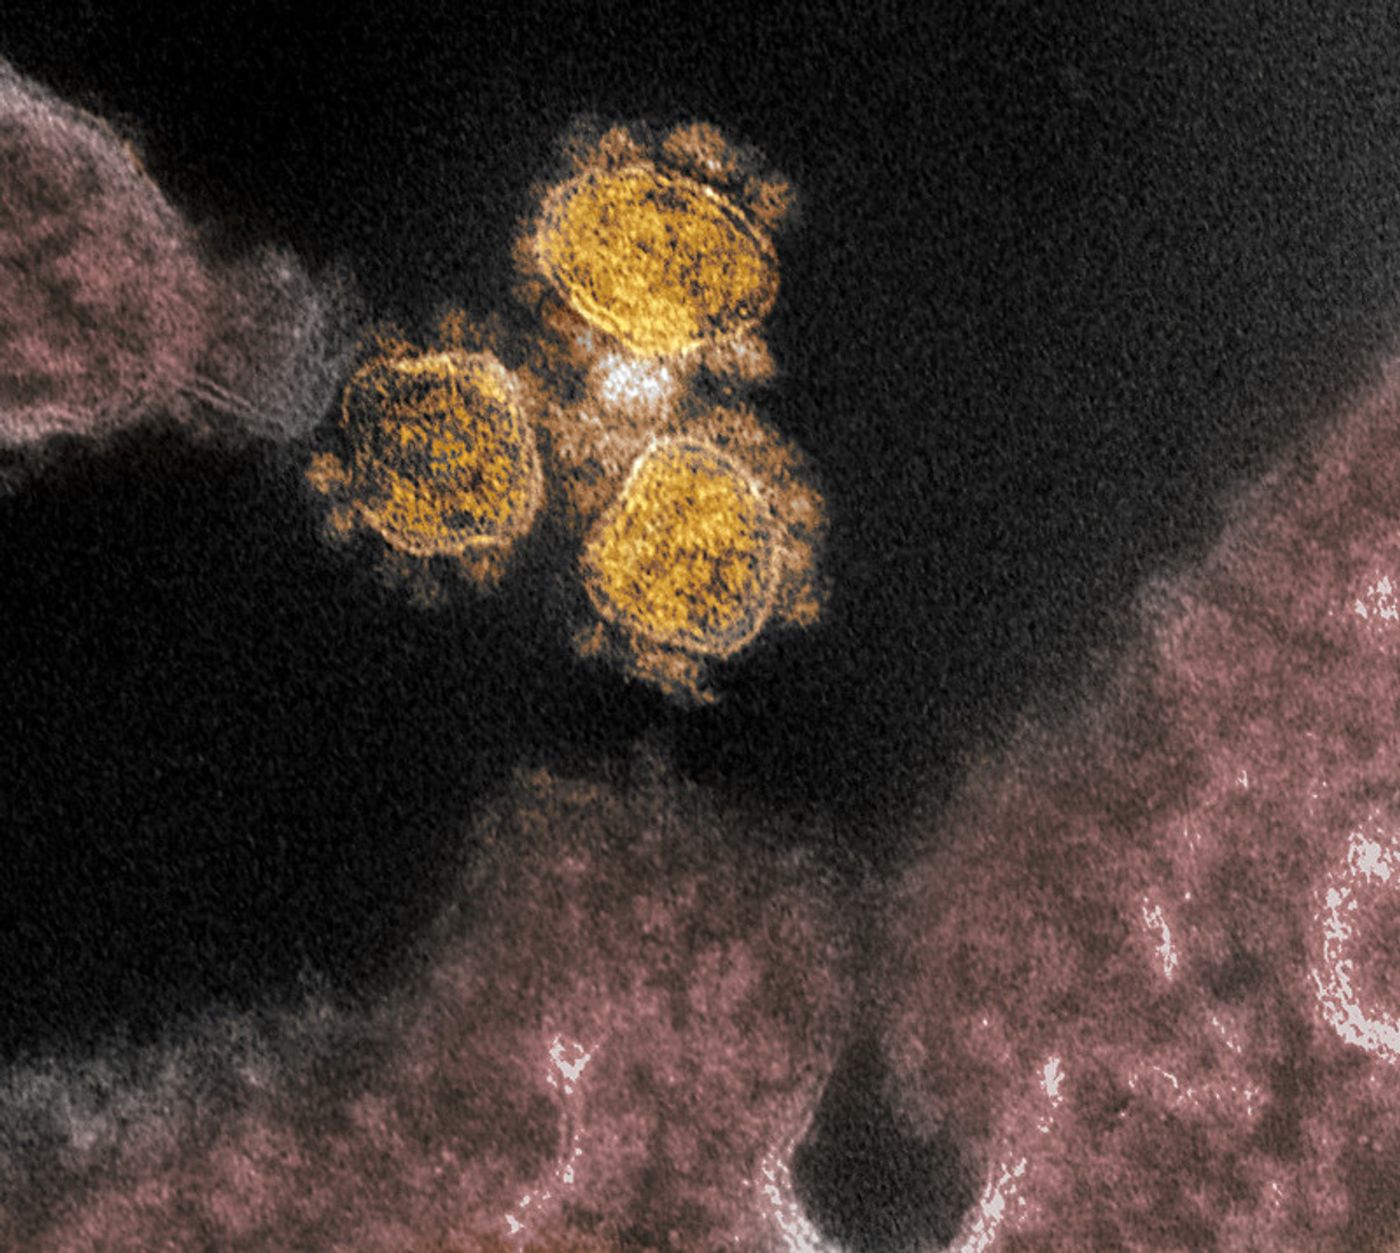 This transmission electron microscope image shows SARS-CoV-2, the virus that causes COVID-19, isolated from a patient in the U.S. Virus particles (round gold objects) are shown emerging from the surface of cells cultured in the lab. The spikes on the outer edge of the virus particles give coronaviruses their name, crown-like. Image captured and colorized at NIAID's Rocky Mountain Laboratories (RML) in Hamilton, Montana. / Credit: NIAID